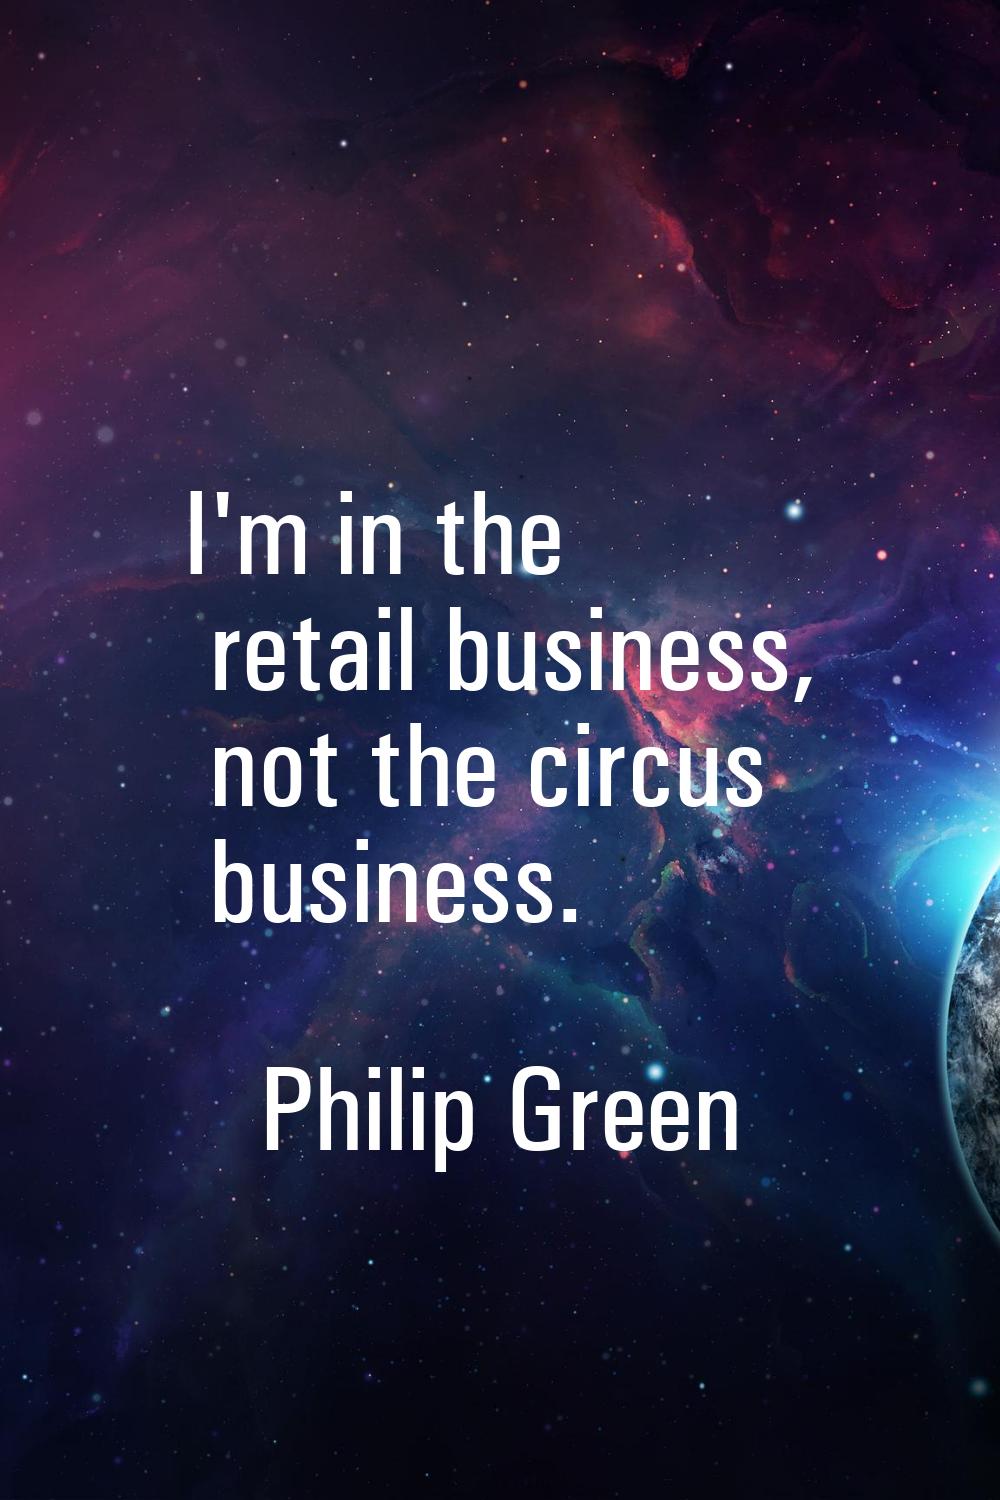 I'm in the retail business, not the circus business.